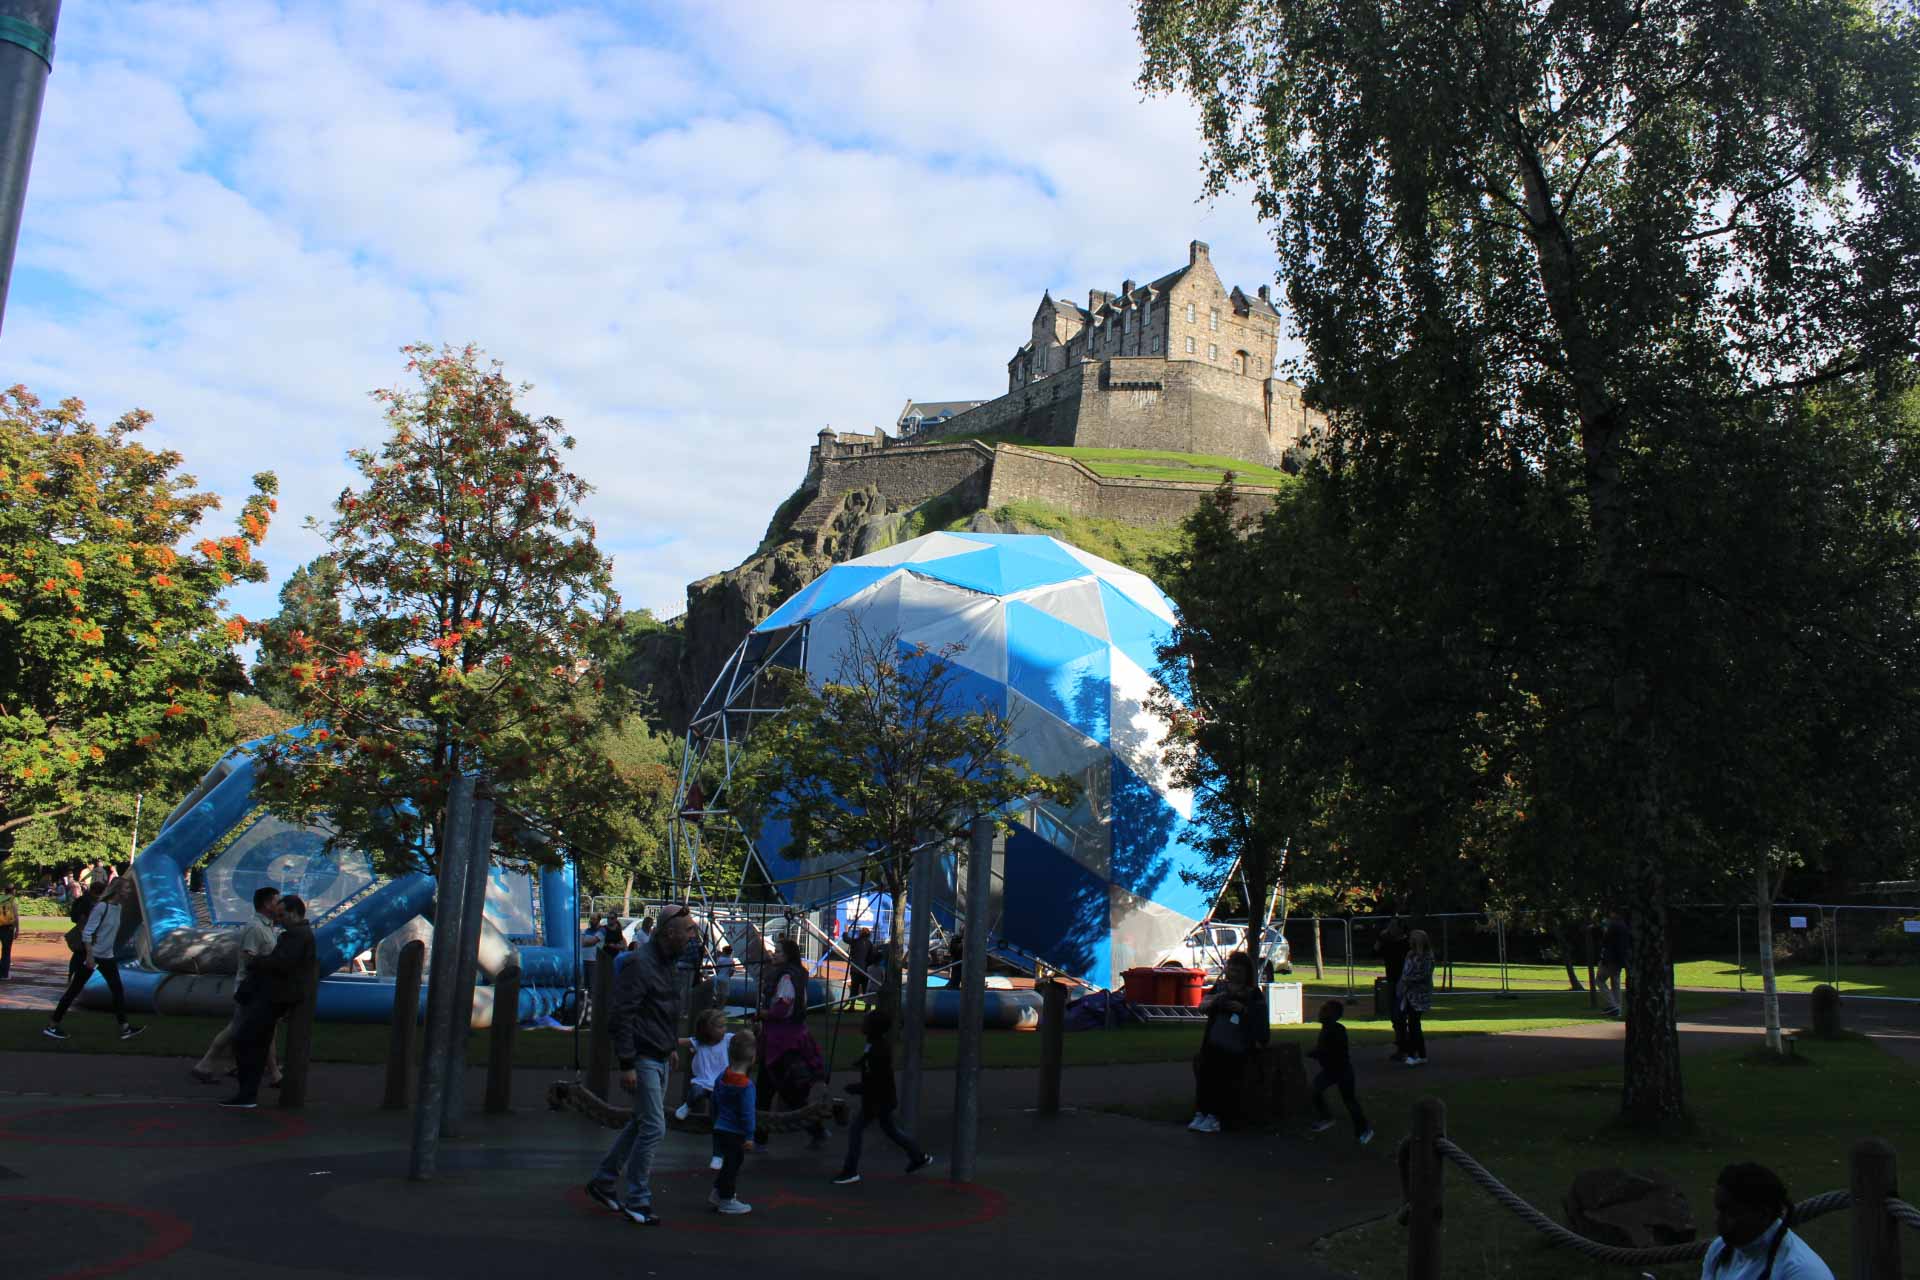   Innovative physical activities for the family in Edinburgh  